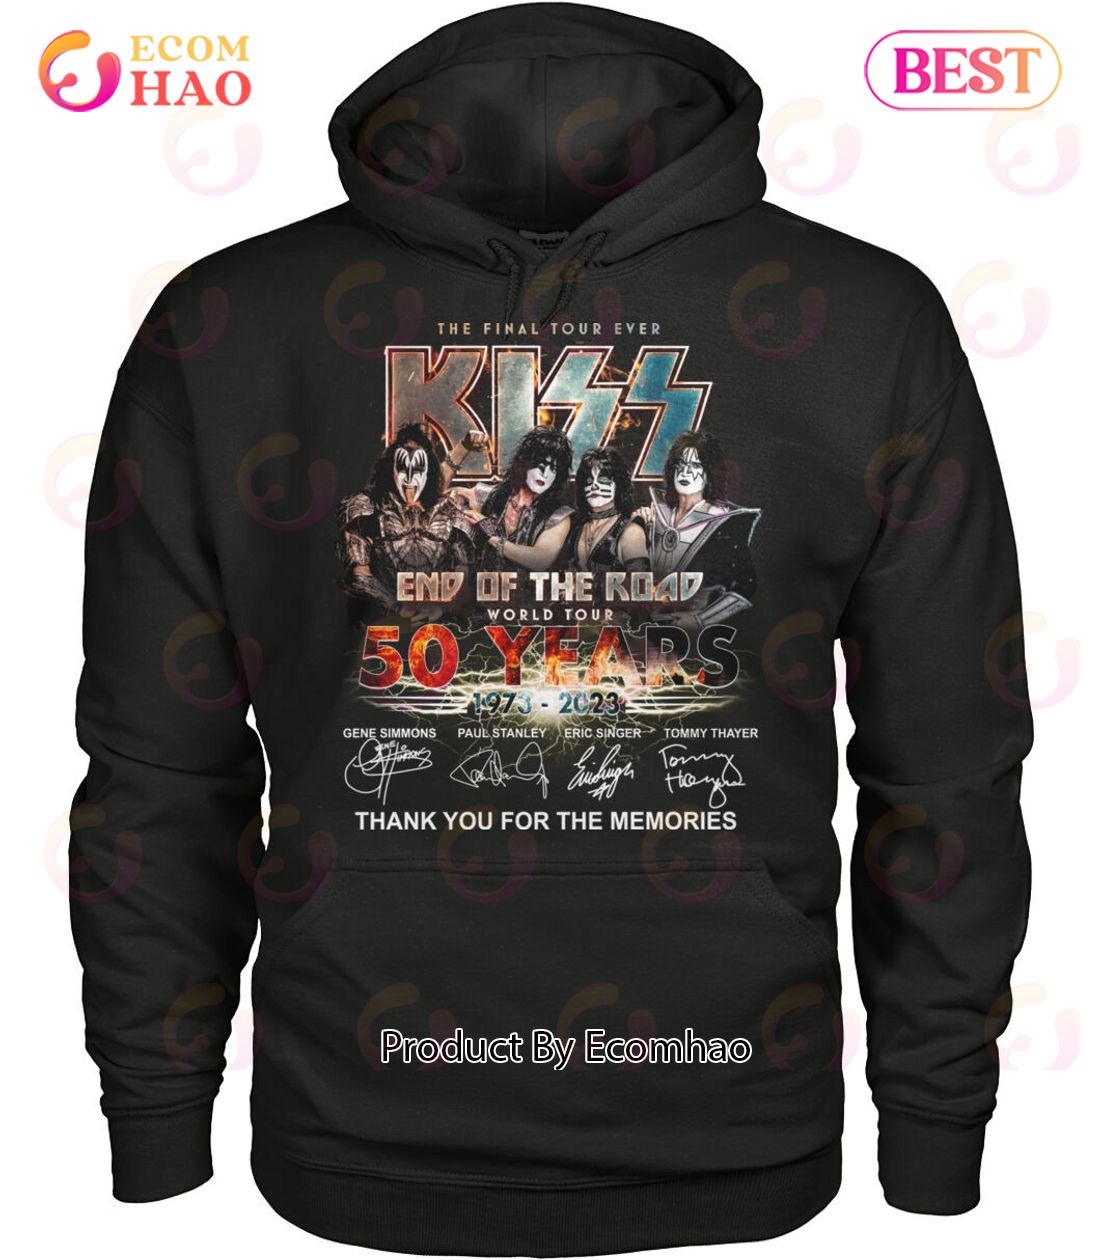 The Final Tour Ever Kiss End Of The Road World Tour 50 Years 1975 2023  Thank You For The Memories T-Shirt